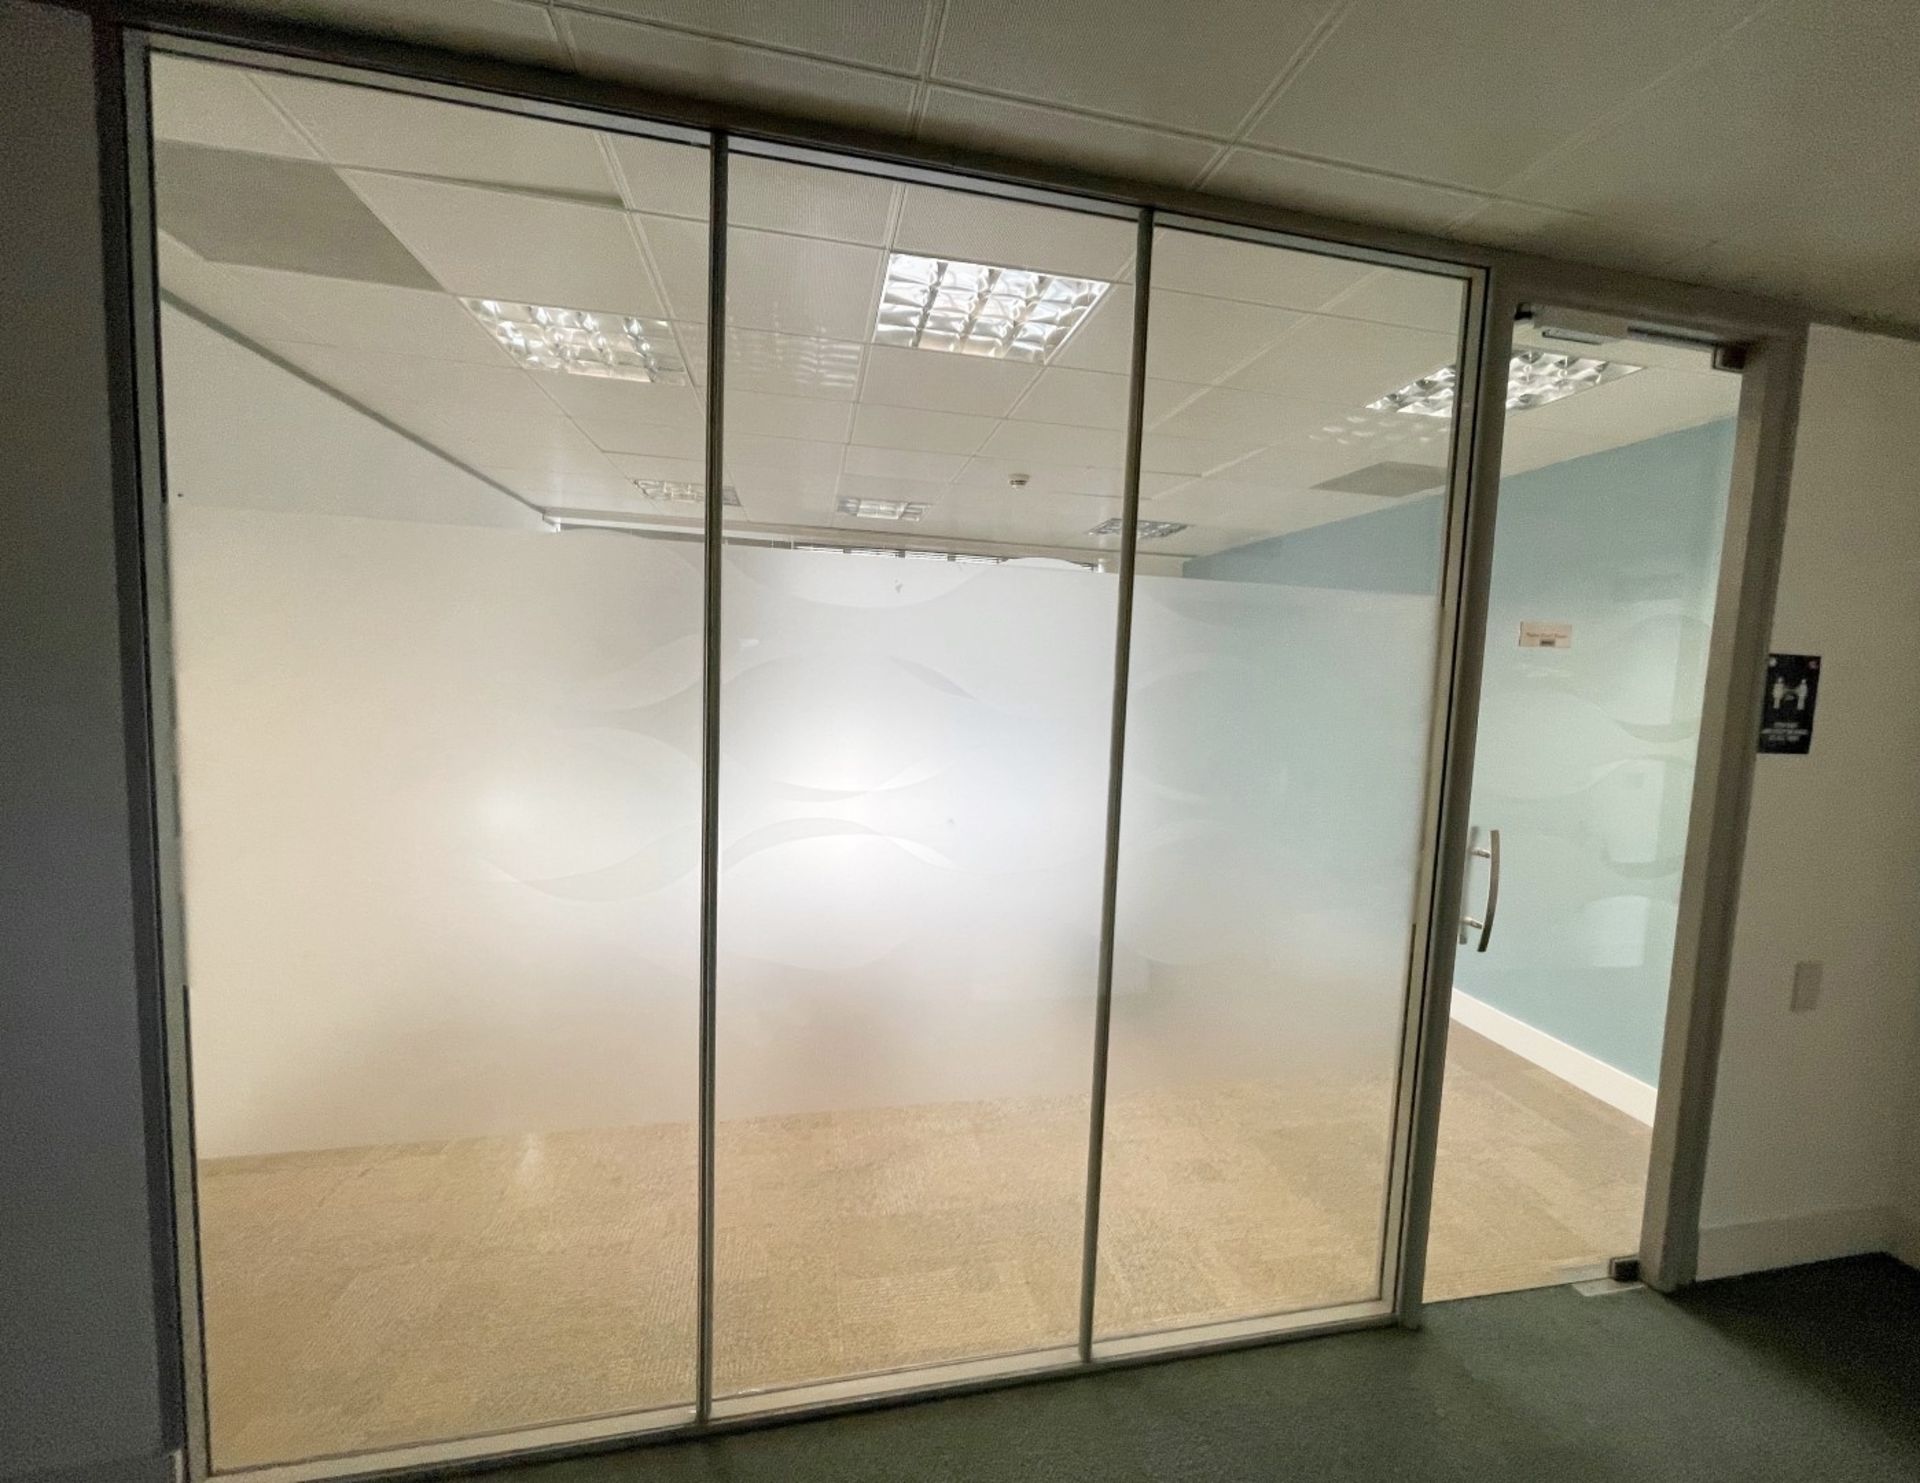 3 x Glass Office Partition Panels, And 1 x Glass Door With Release Button - Currently Covers An Area